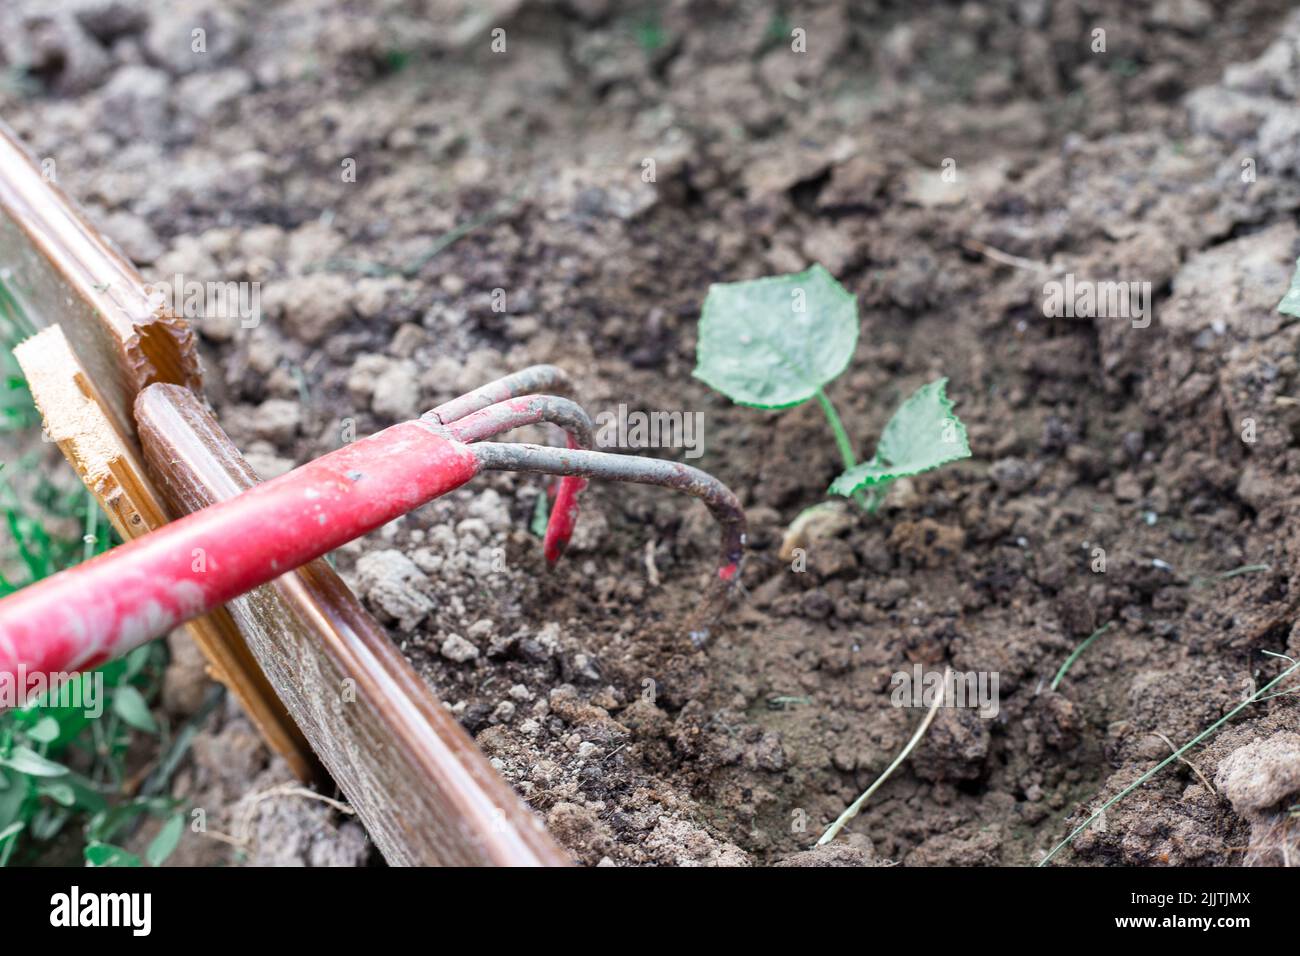 Cultivating the land in the garden with a hoe Stock Photo